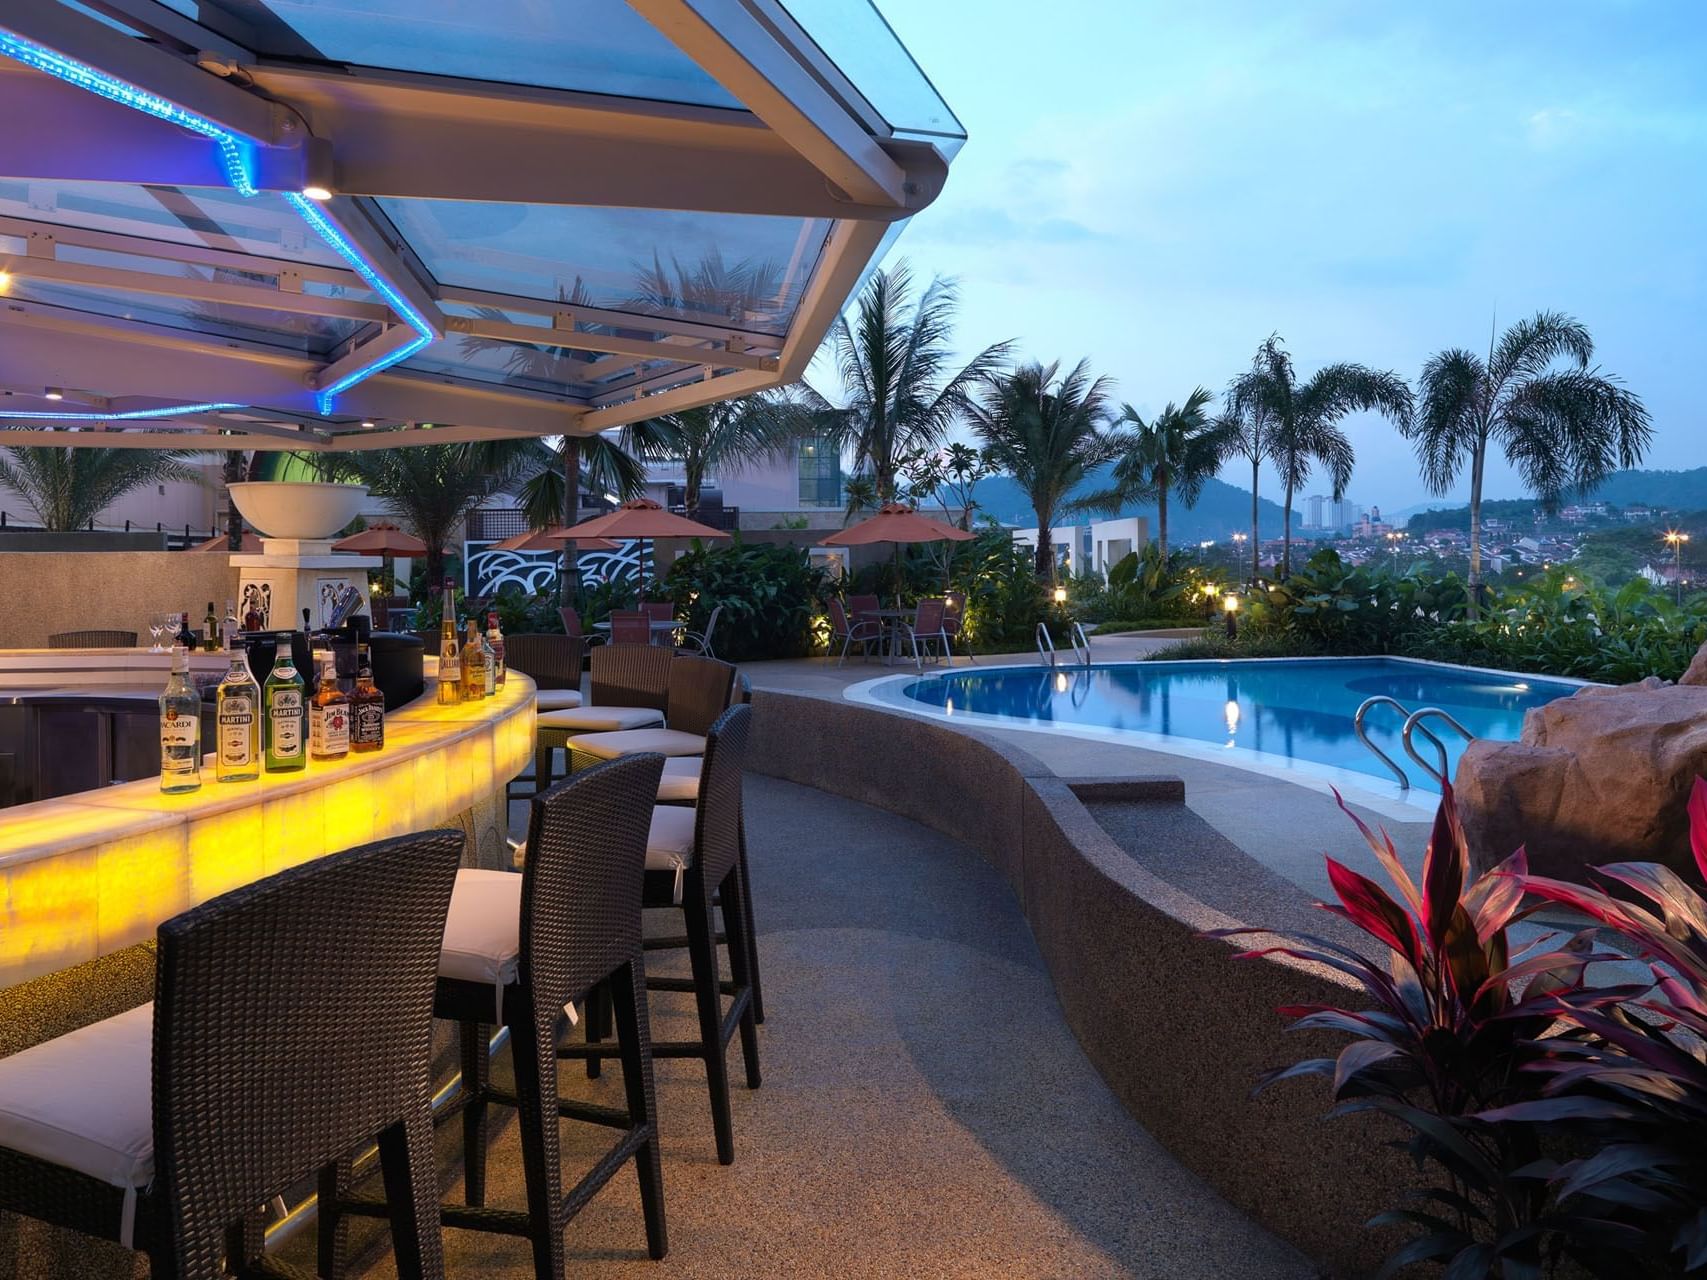 Outdoor bar with black chairs next to the pool area at night in One World Hotel